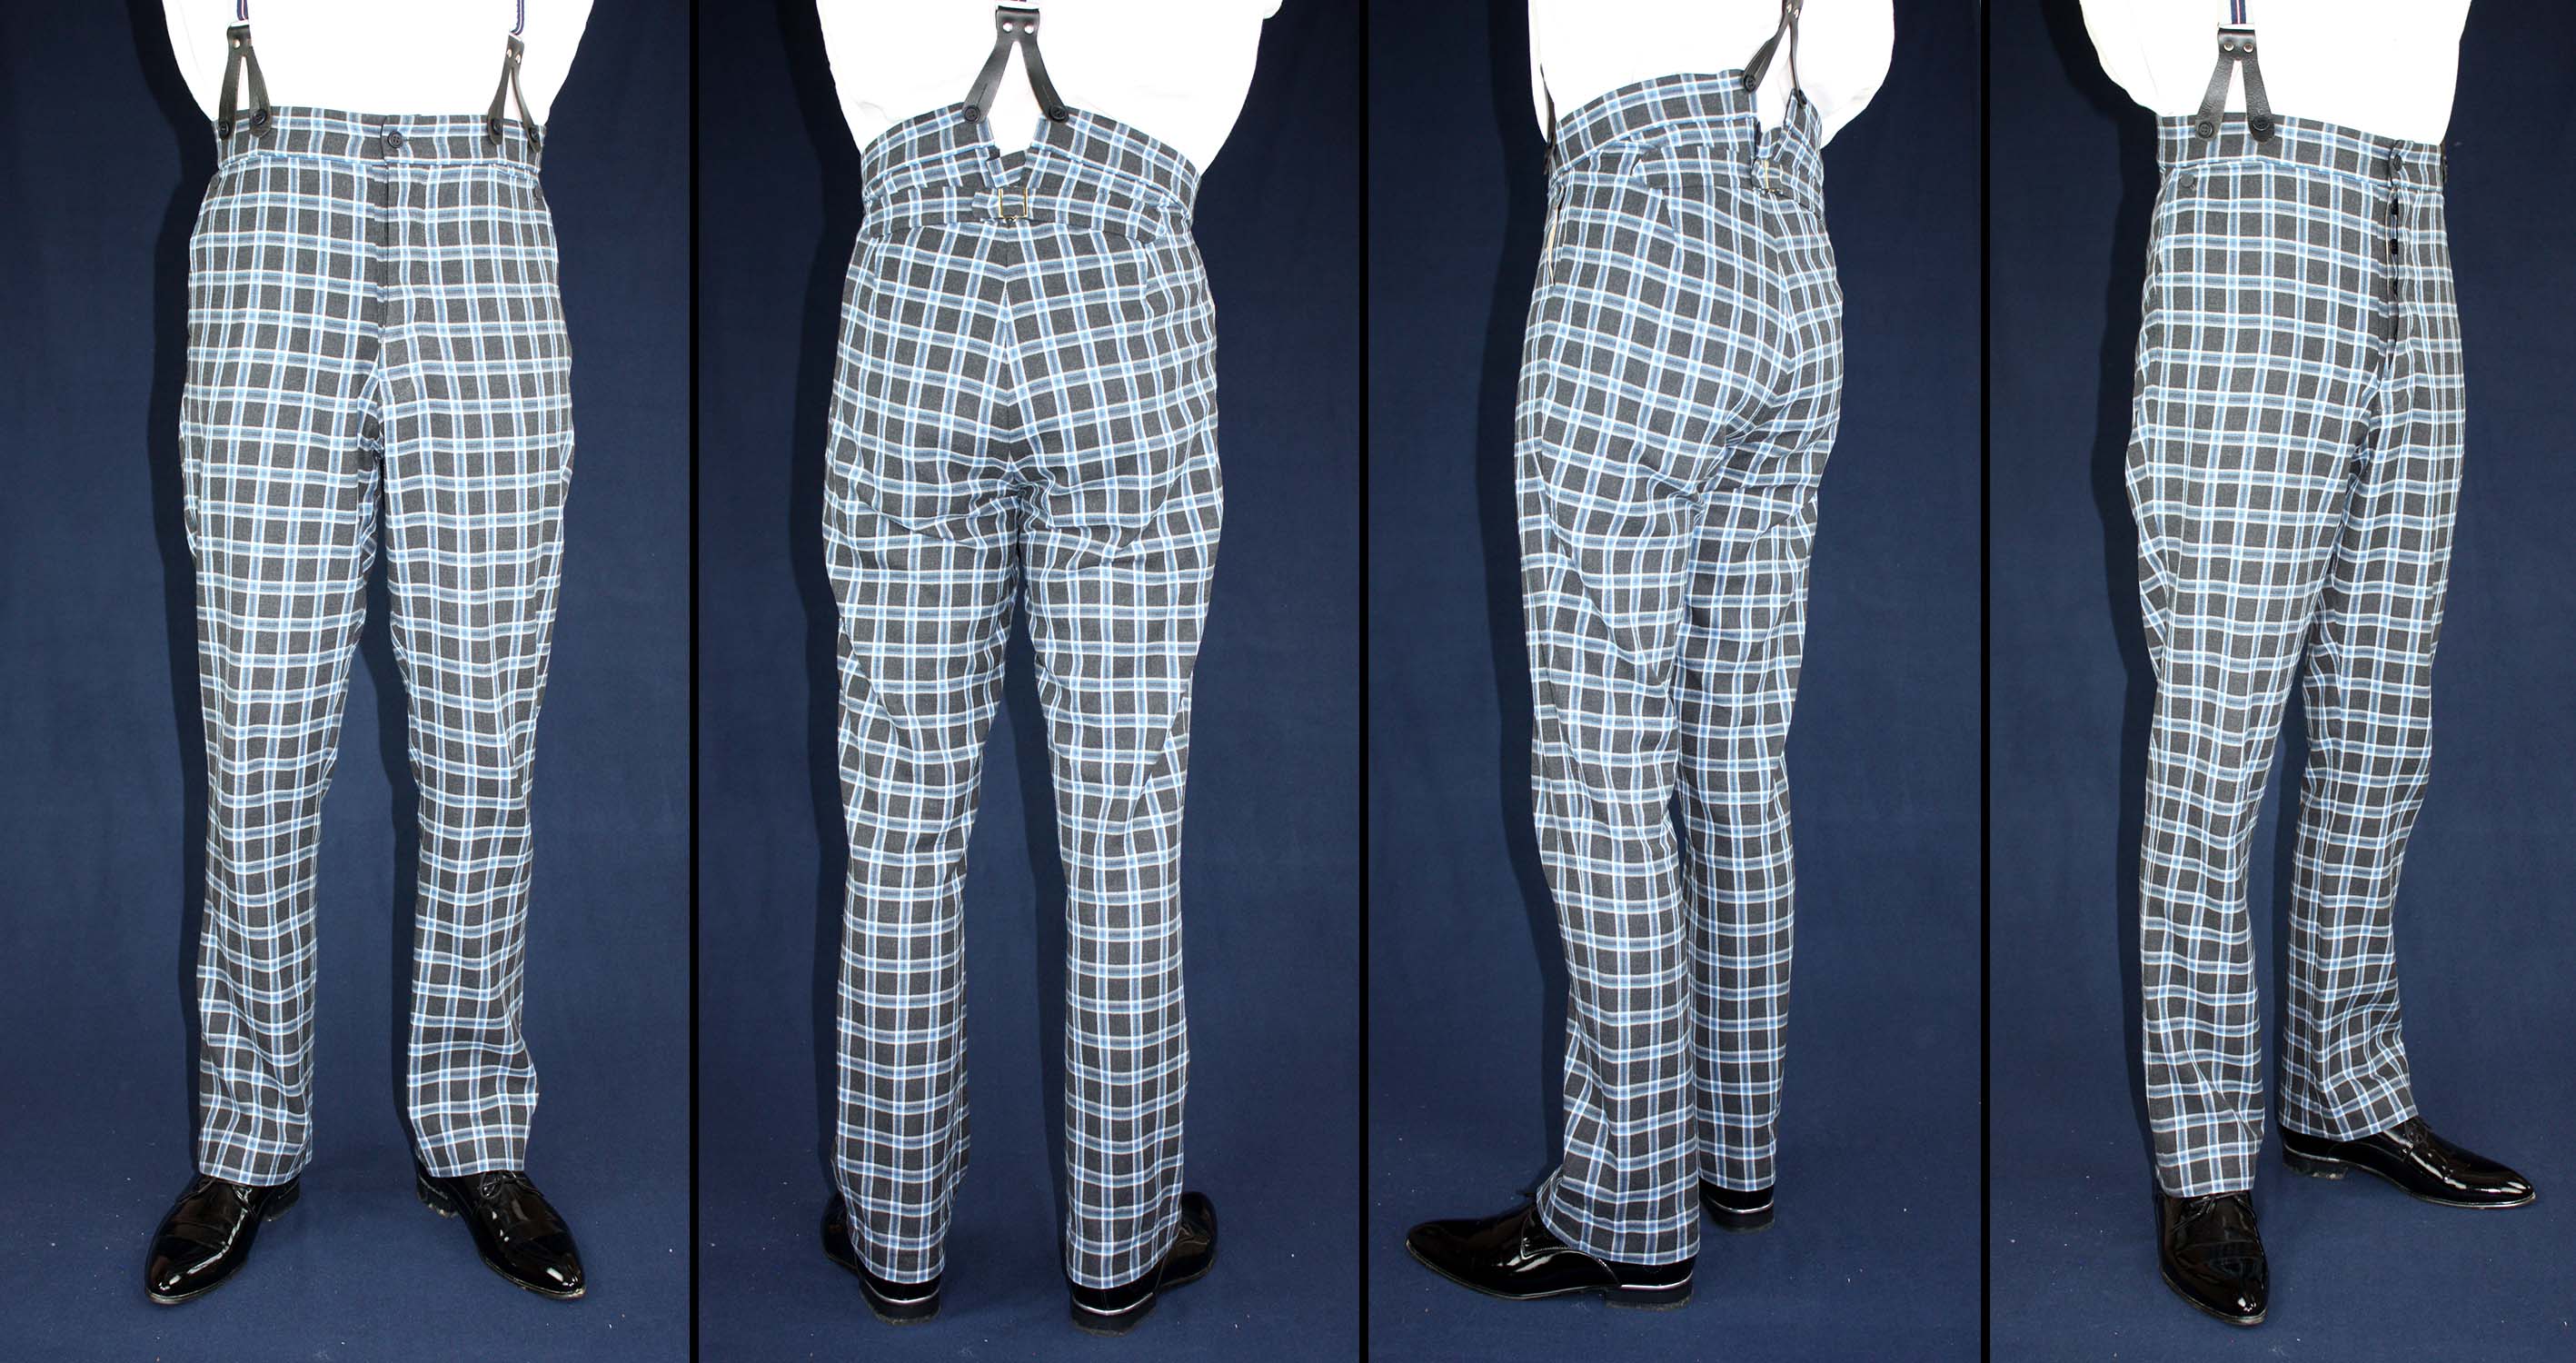 Trousers Biedermeier 1830 to 1860 with a wide and a tight fitting leg Sewing Pattern #0218 Size US 34-56 (EU 44-66) PDF Download